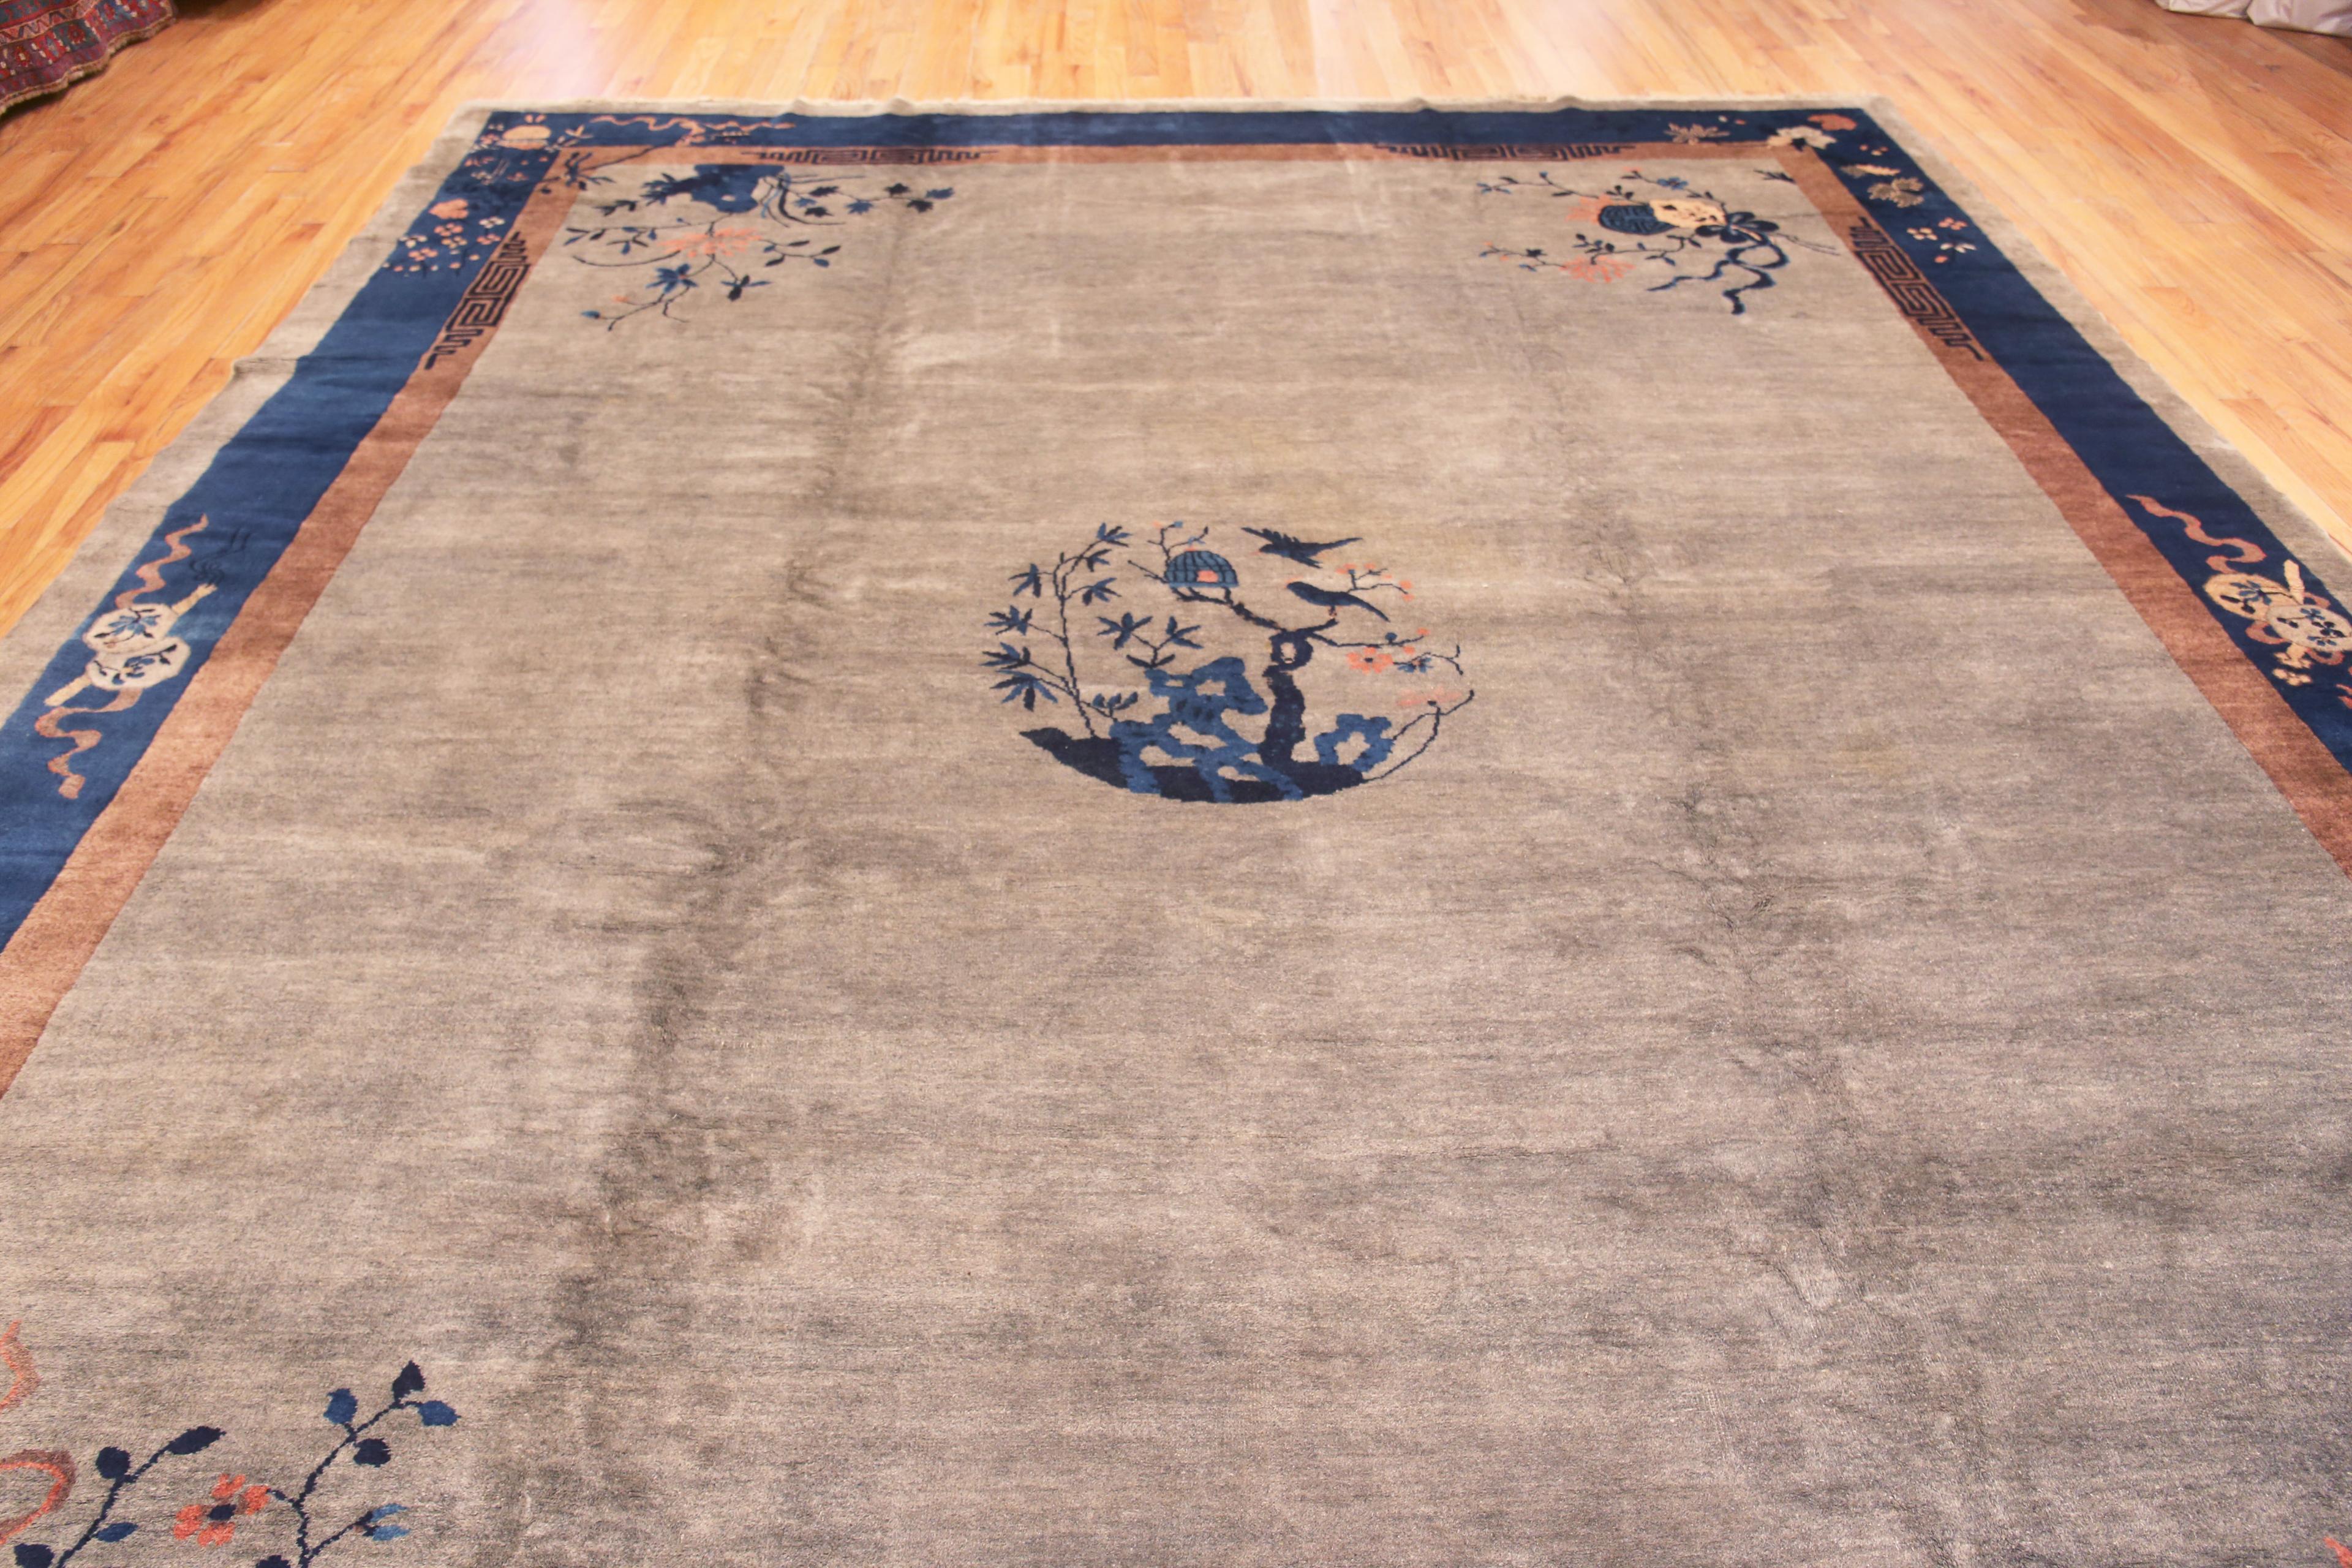 Magnificent Antique Chinese Art Deco Central Medallion Area Rug, country of origin: China, Circa date: 1900